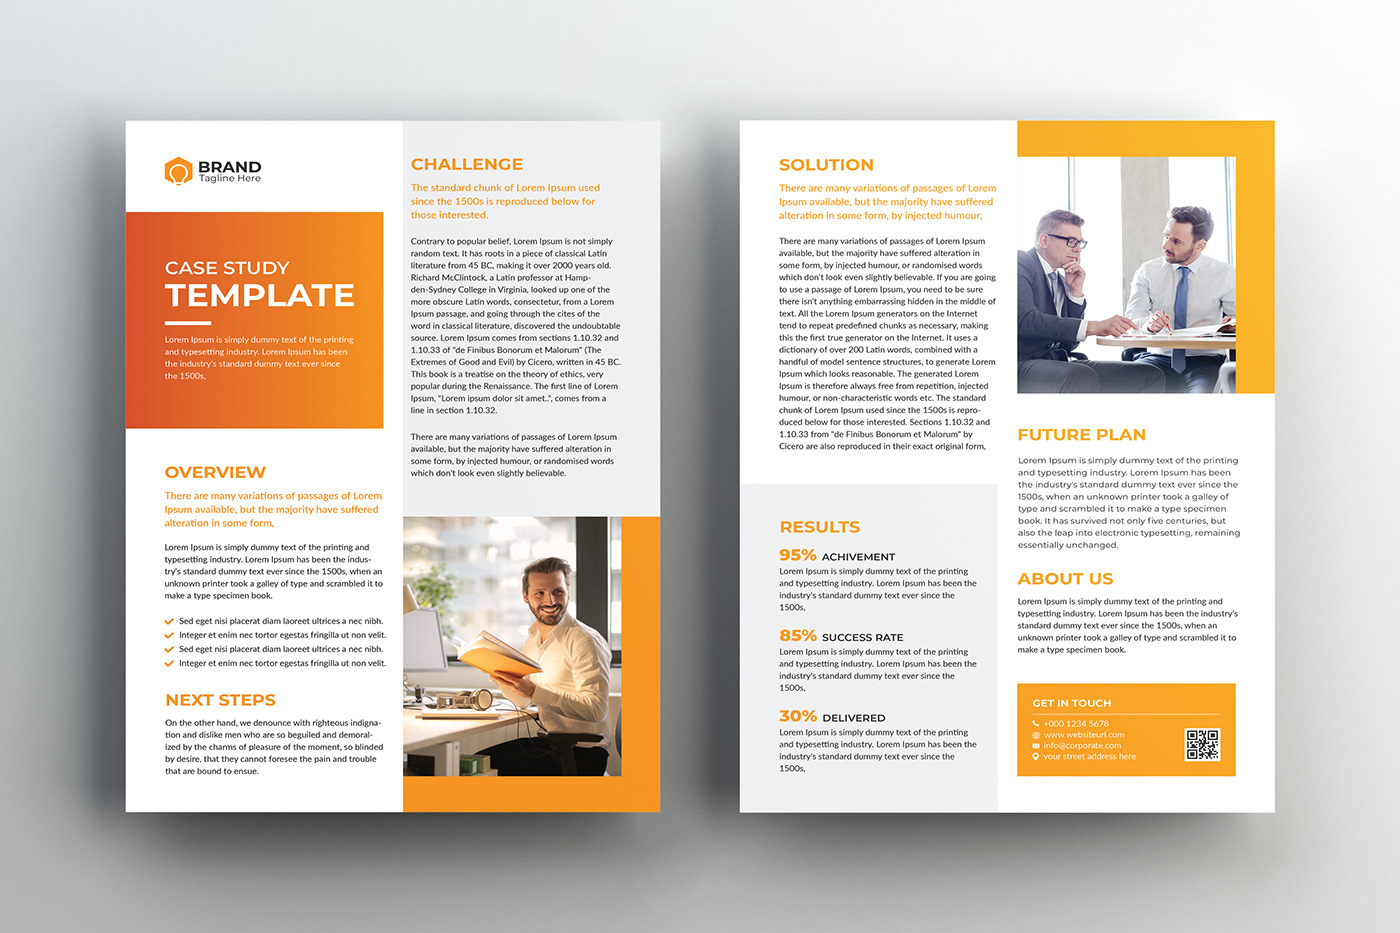 #BEST CASE STUDY #booklet #CASE HISTORY #Case Study #catalog #Corporate   #flyer #multipurpose #newsletter  #research